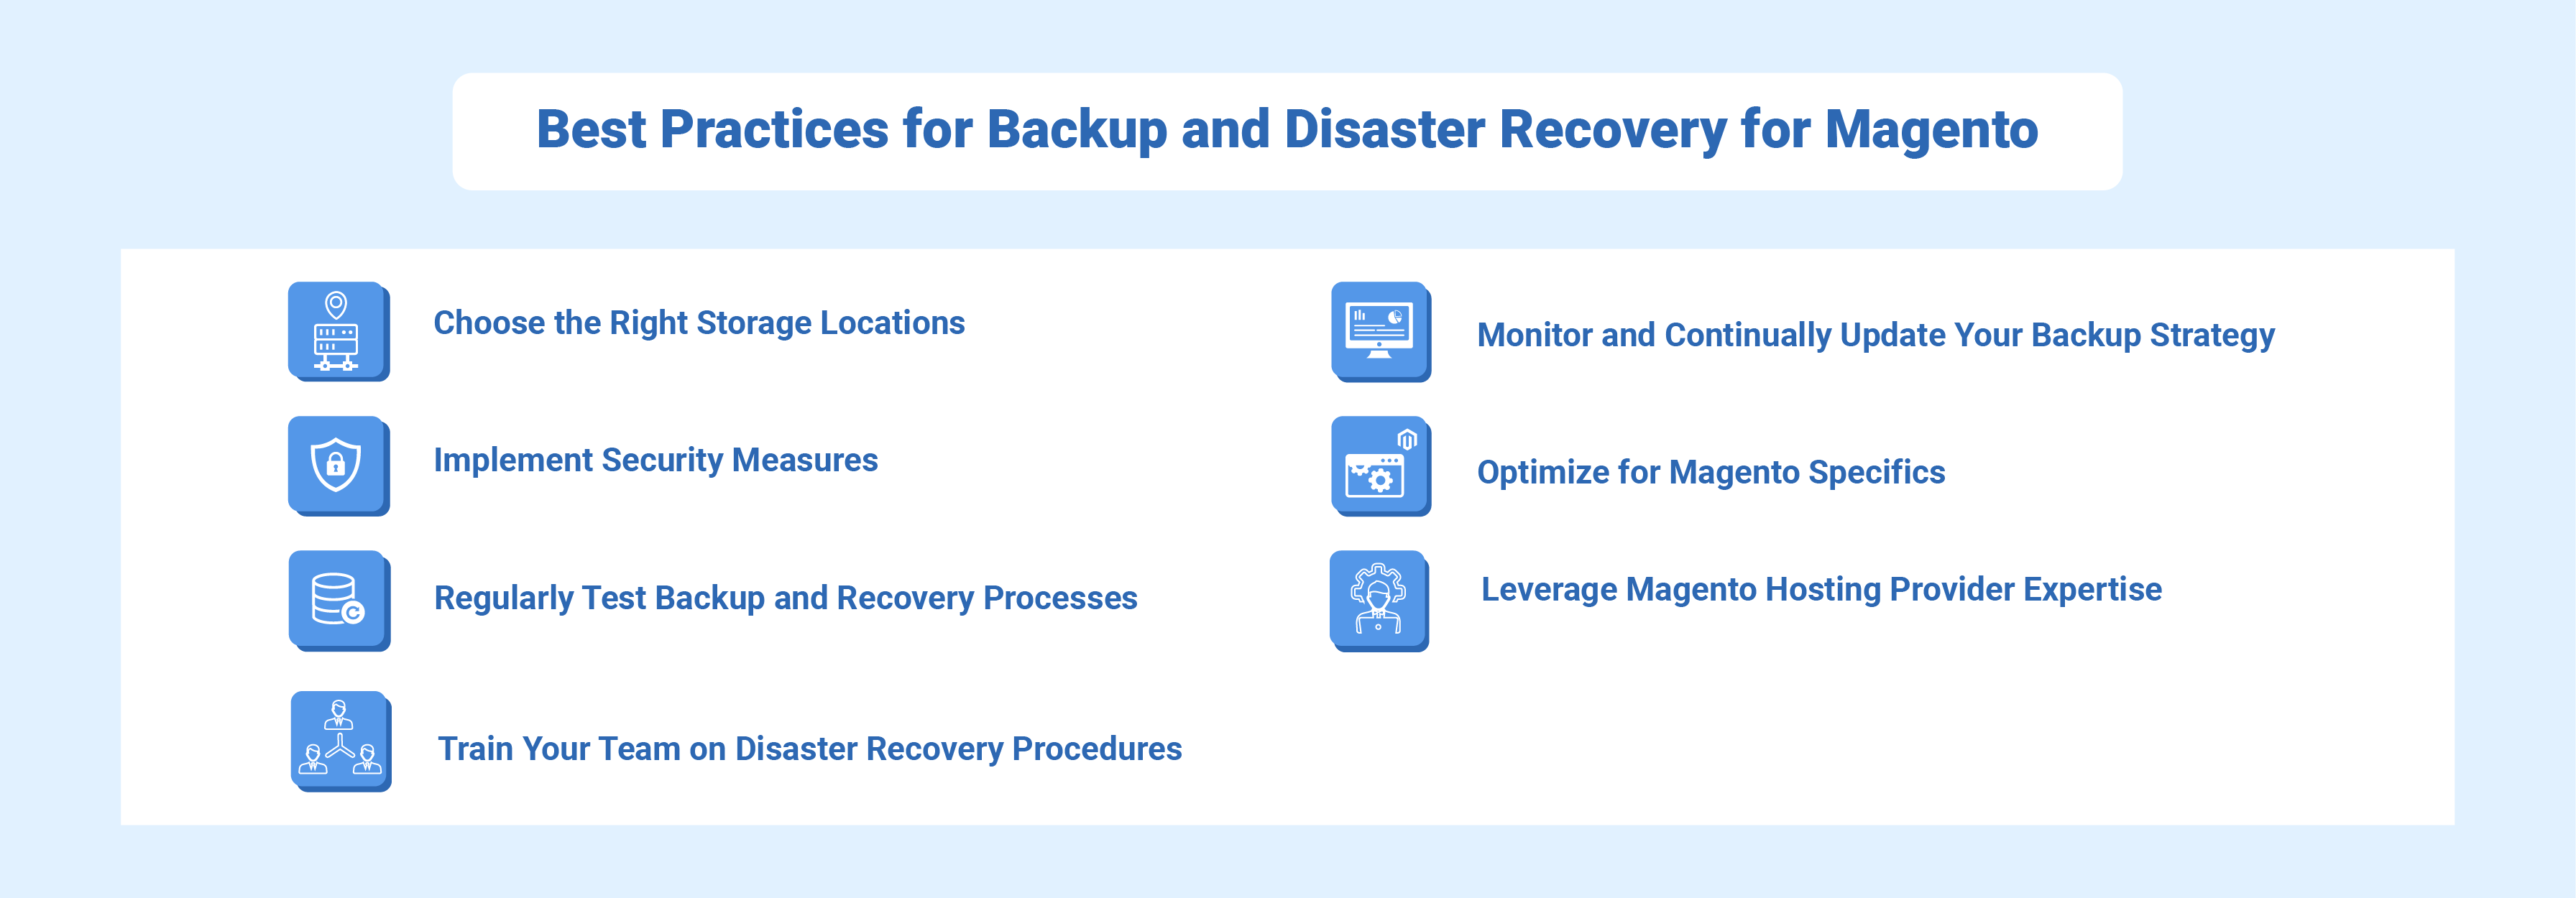 Essential best practices for Magento backup and disaster recovery planning